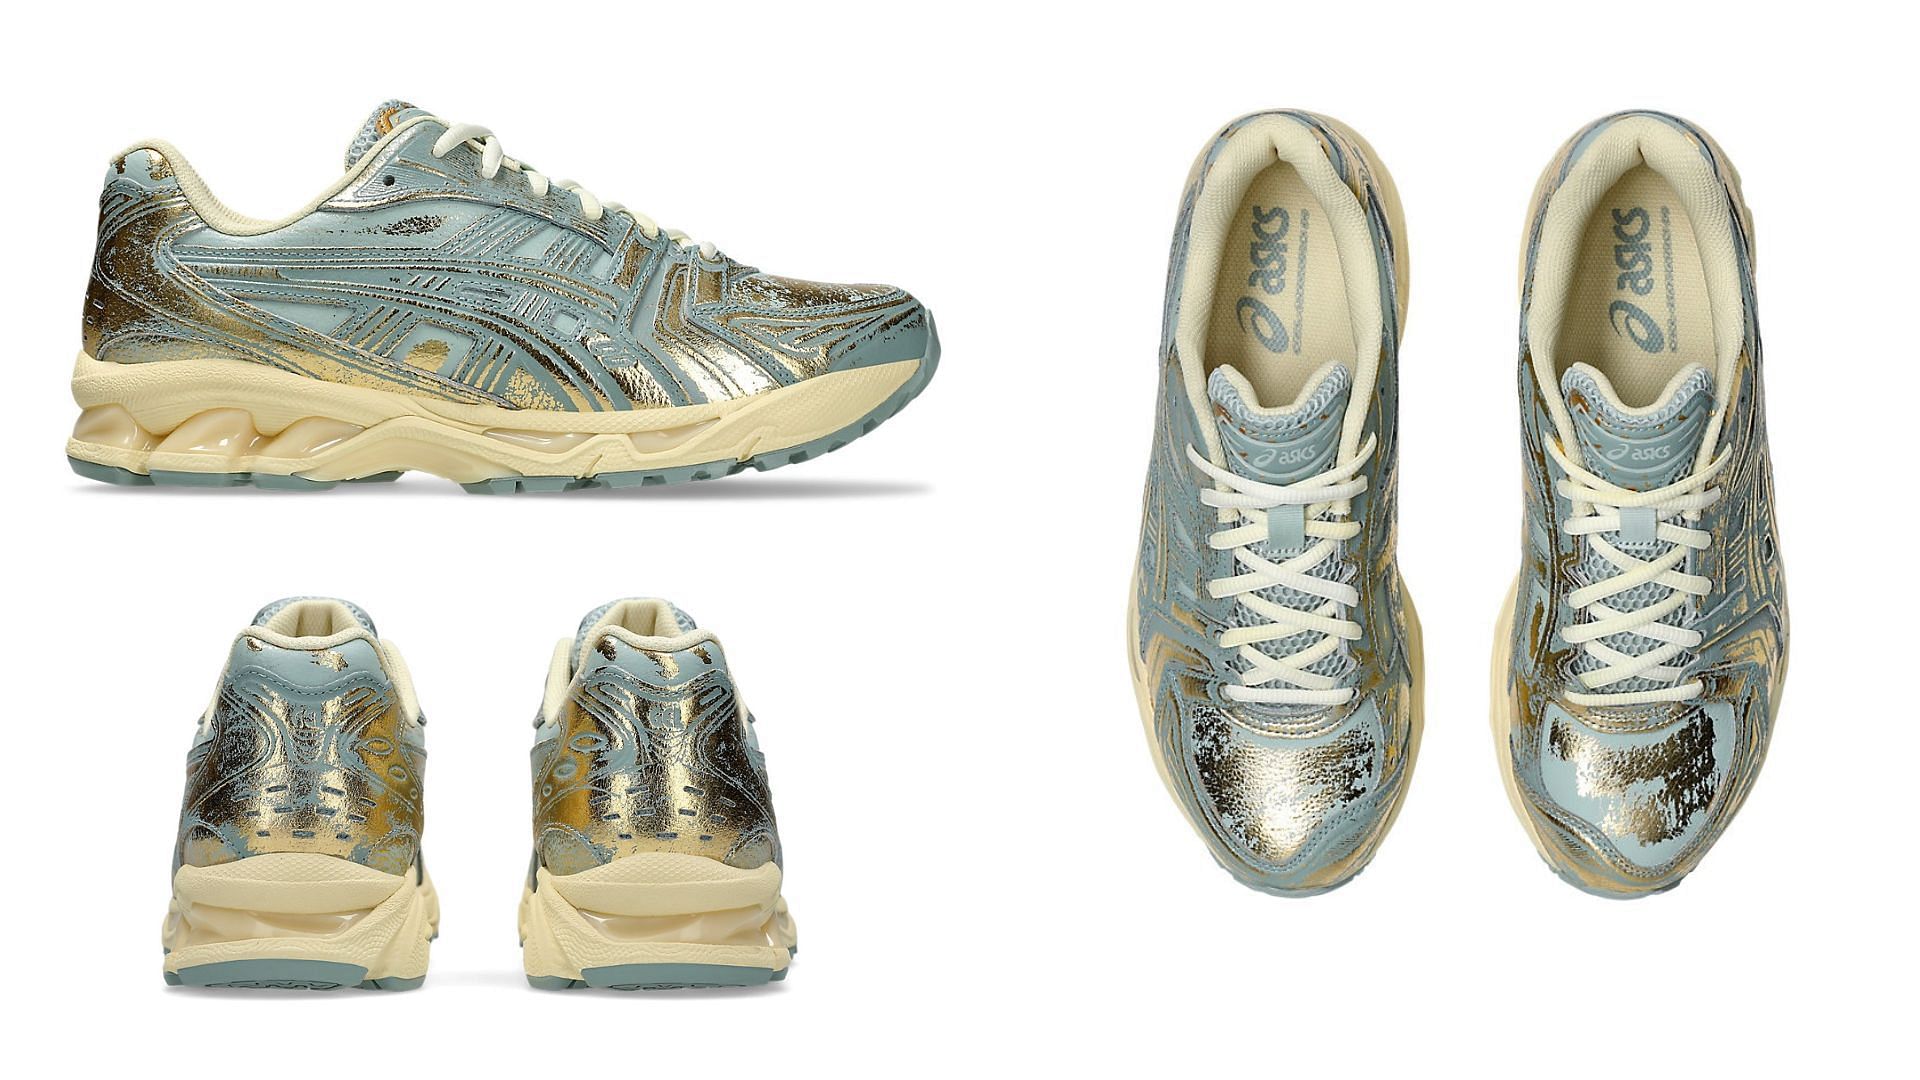 A closer look at the Asics Gel-Kayano 14 Pre-Worn sneakers (Image via YouTube/@ragnoupdates)